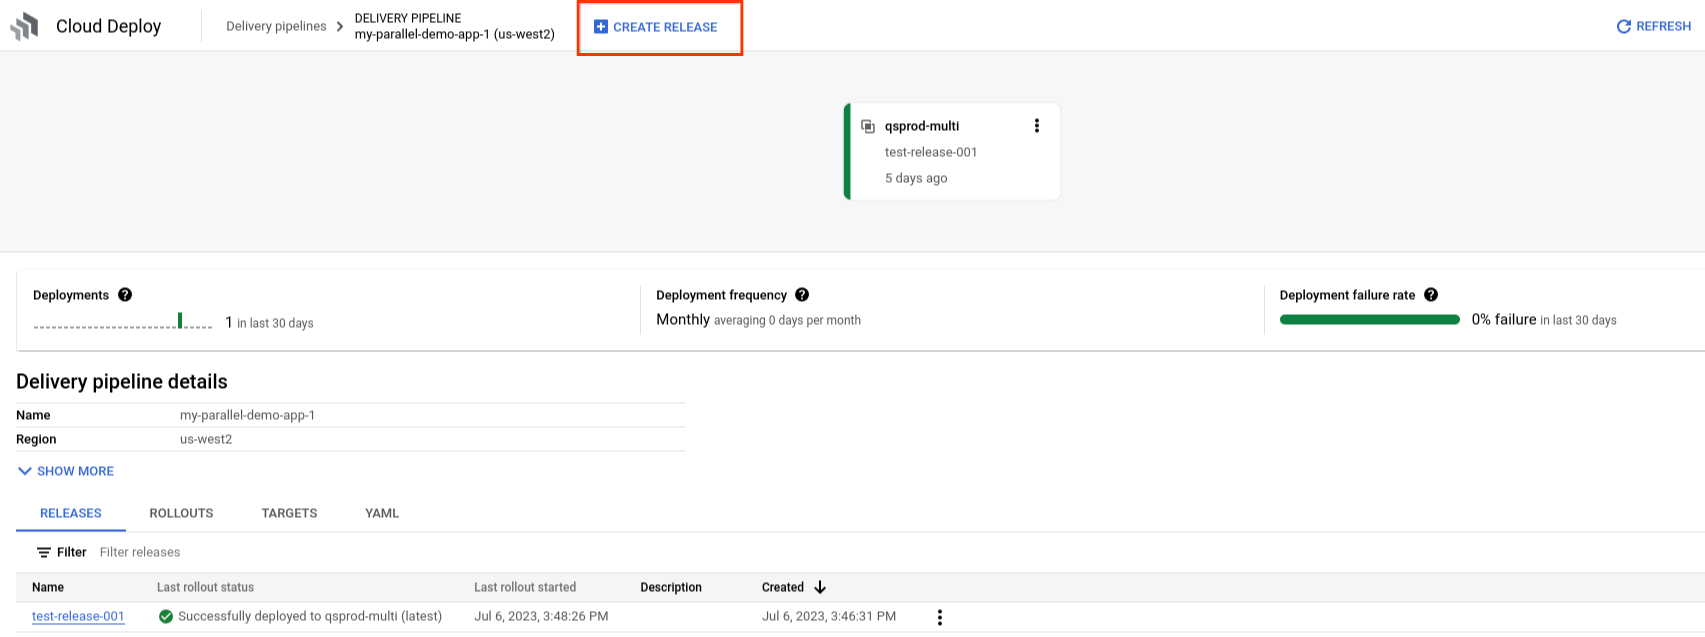 delivery pipeline details, showing the create release button 